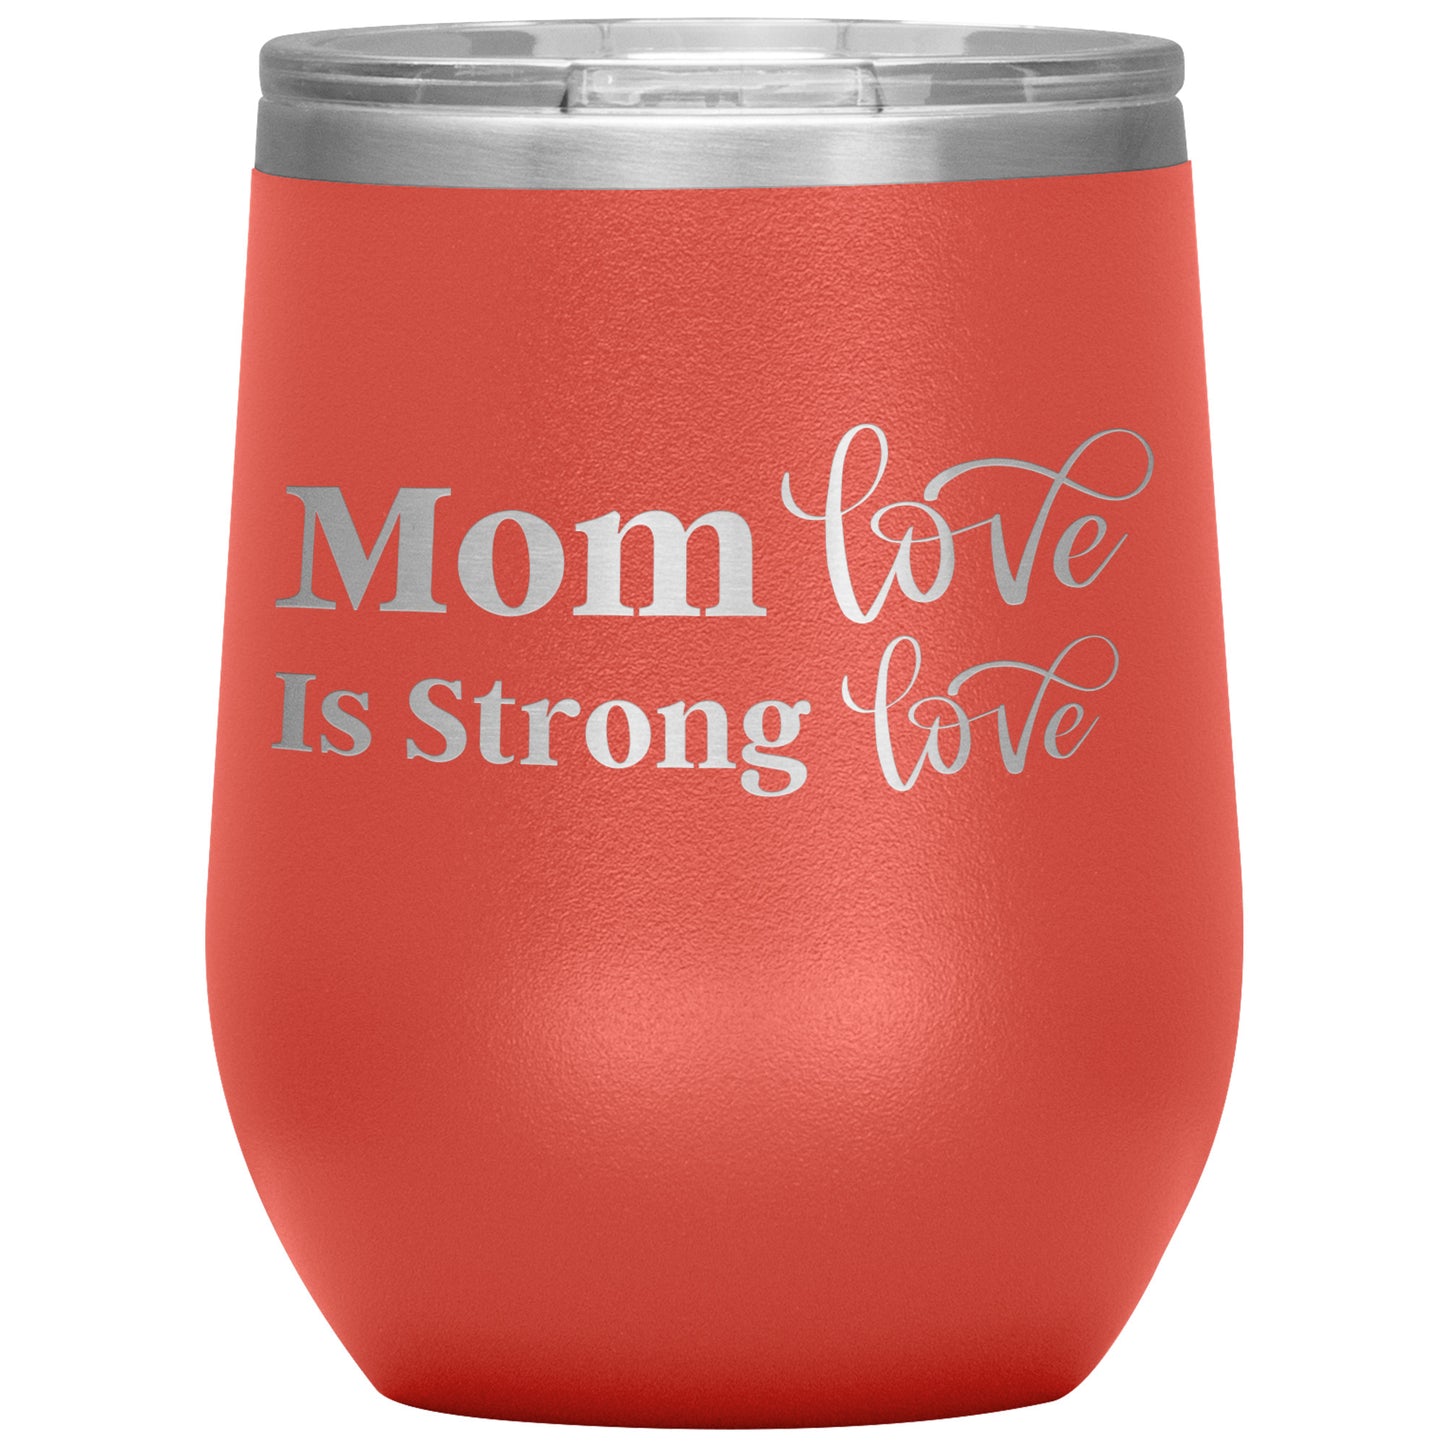 Mom Love Is Strong Love ❤️ Tumbler